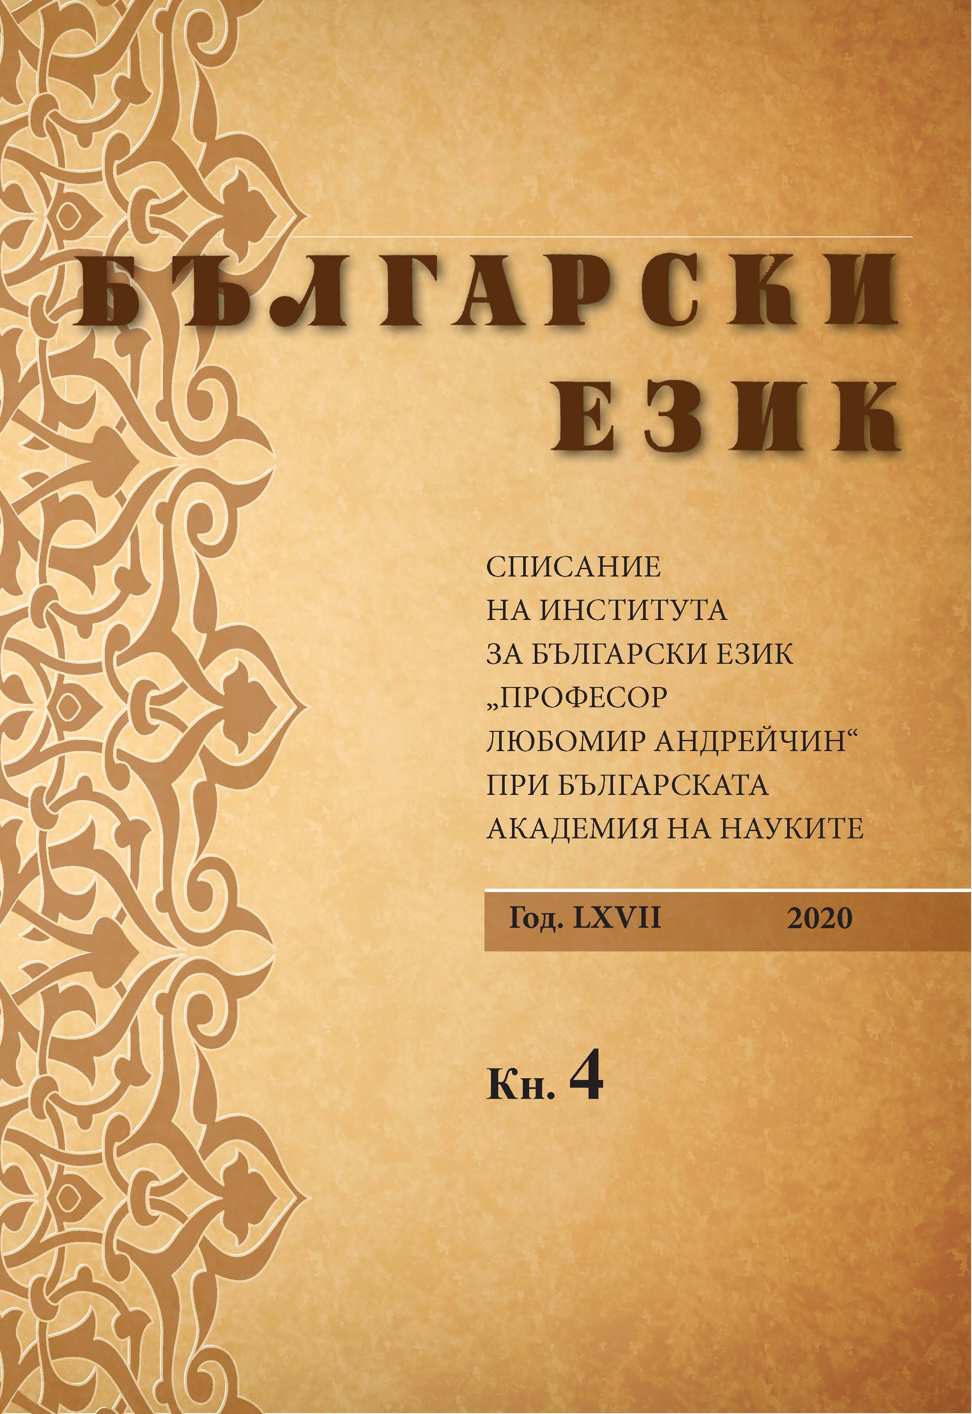 Axiological Issues in the Slavic Languages (Traditions and Modernity) Cover Image